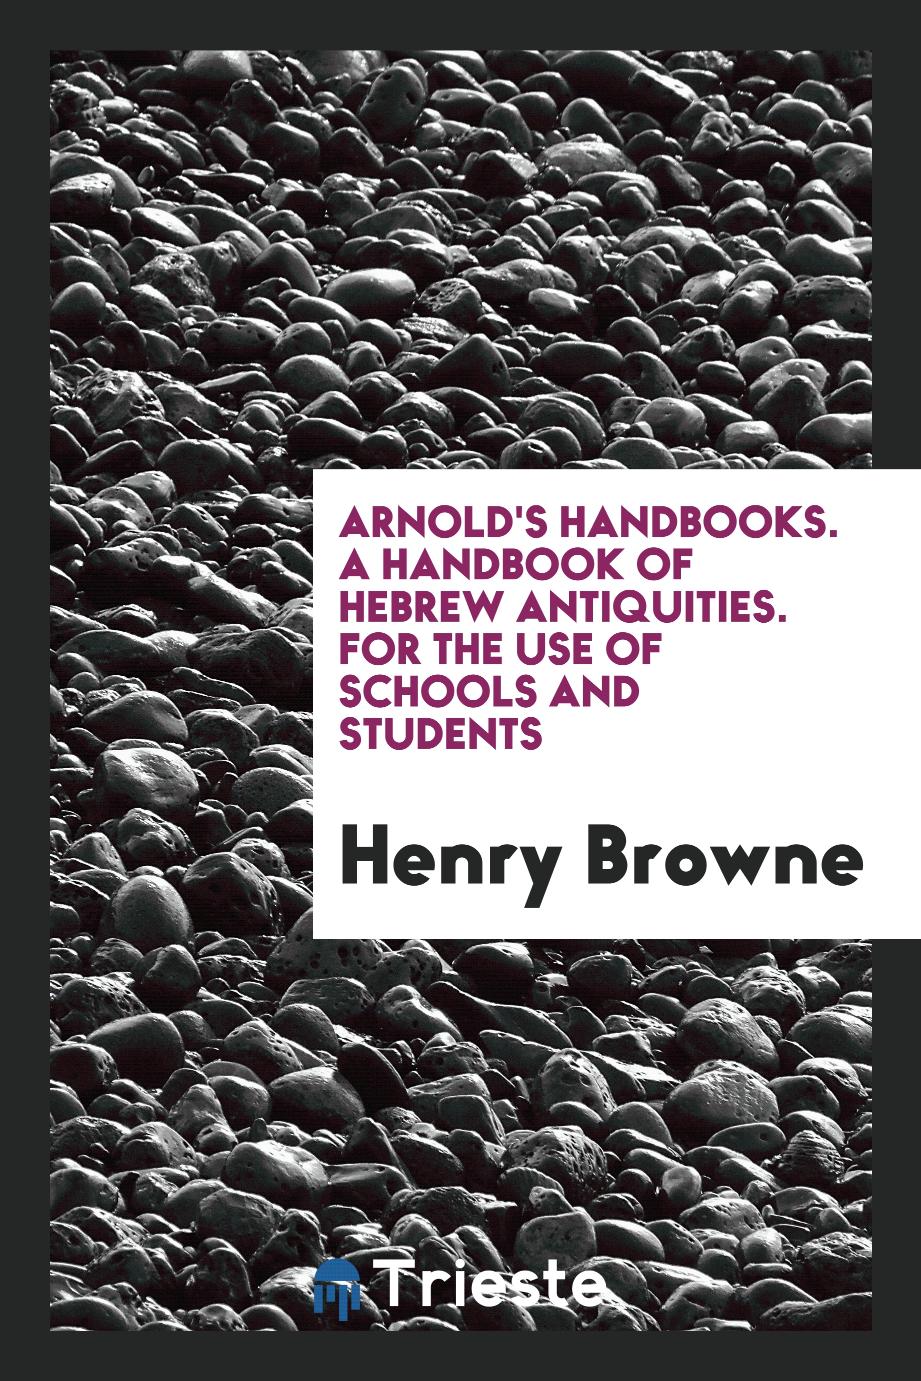 Arnold's Handbooks. A Handbook of Hebrew Antiquities. For the Use of Schools and Students